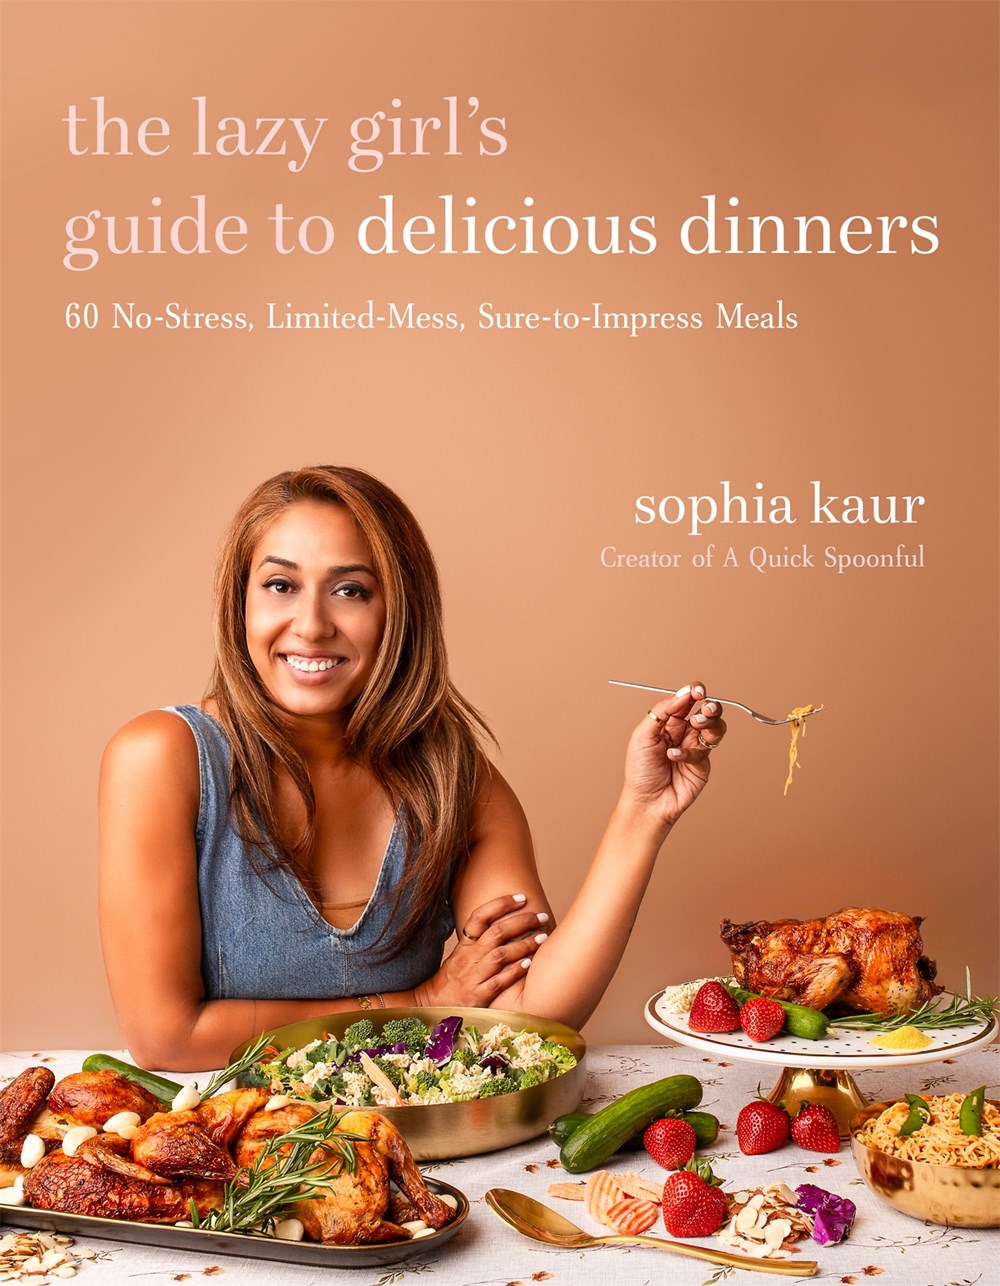 The Lazy Girl’s Guide to Delicious Dinners: 60 No-Stress, Limited-Mess, Sure-to-Impress Meals